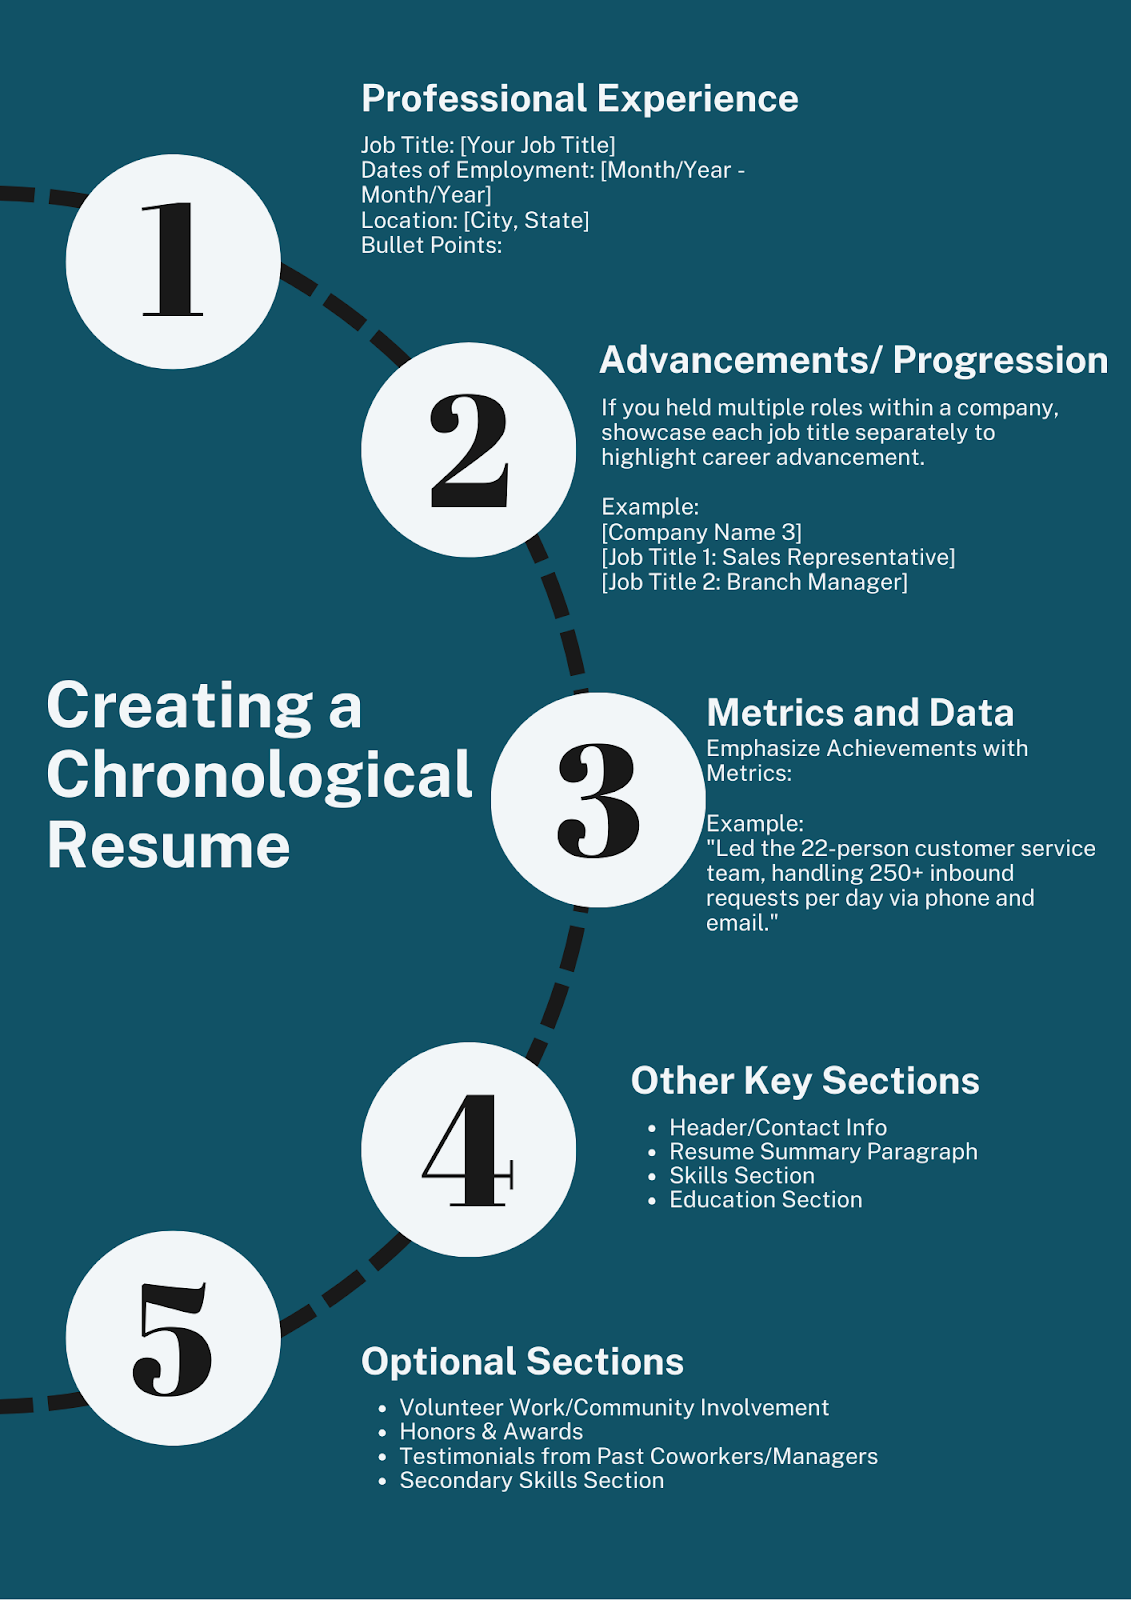 chronological resumes are used for